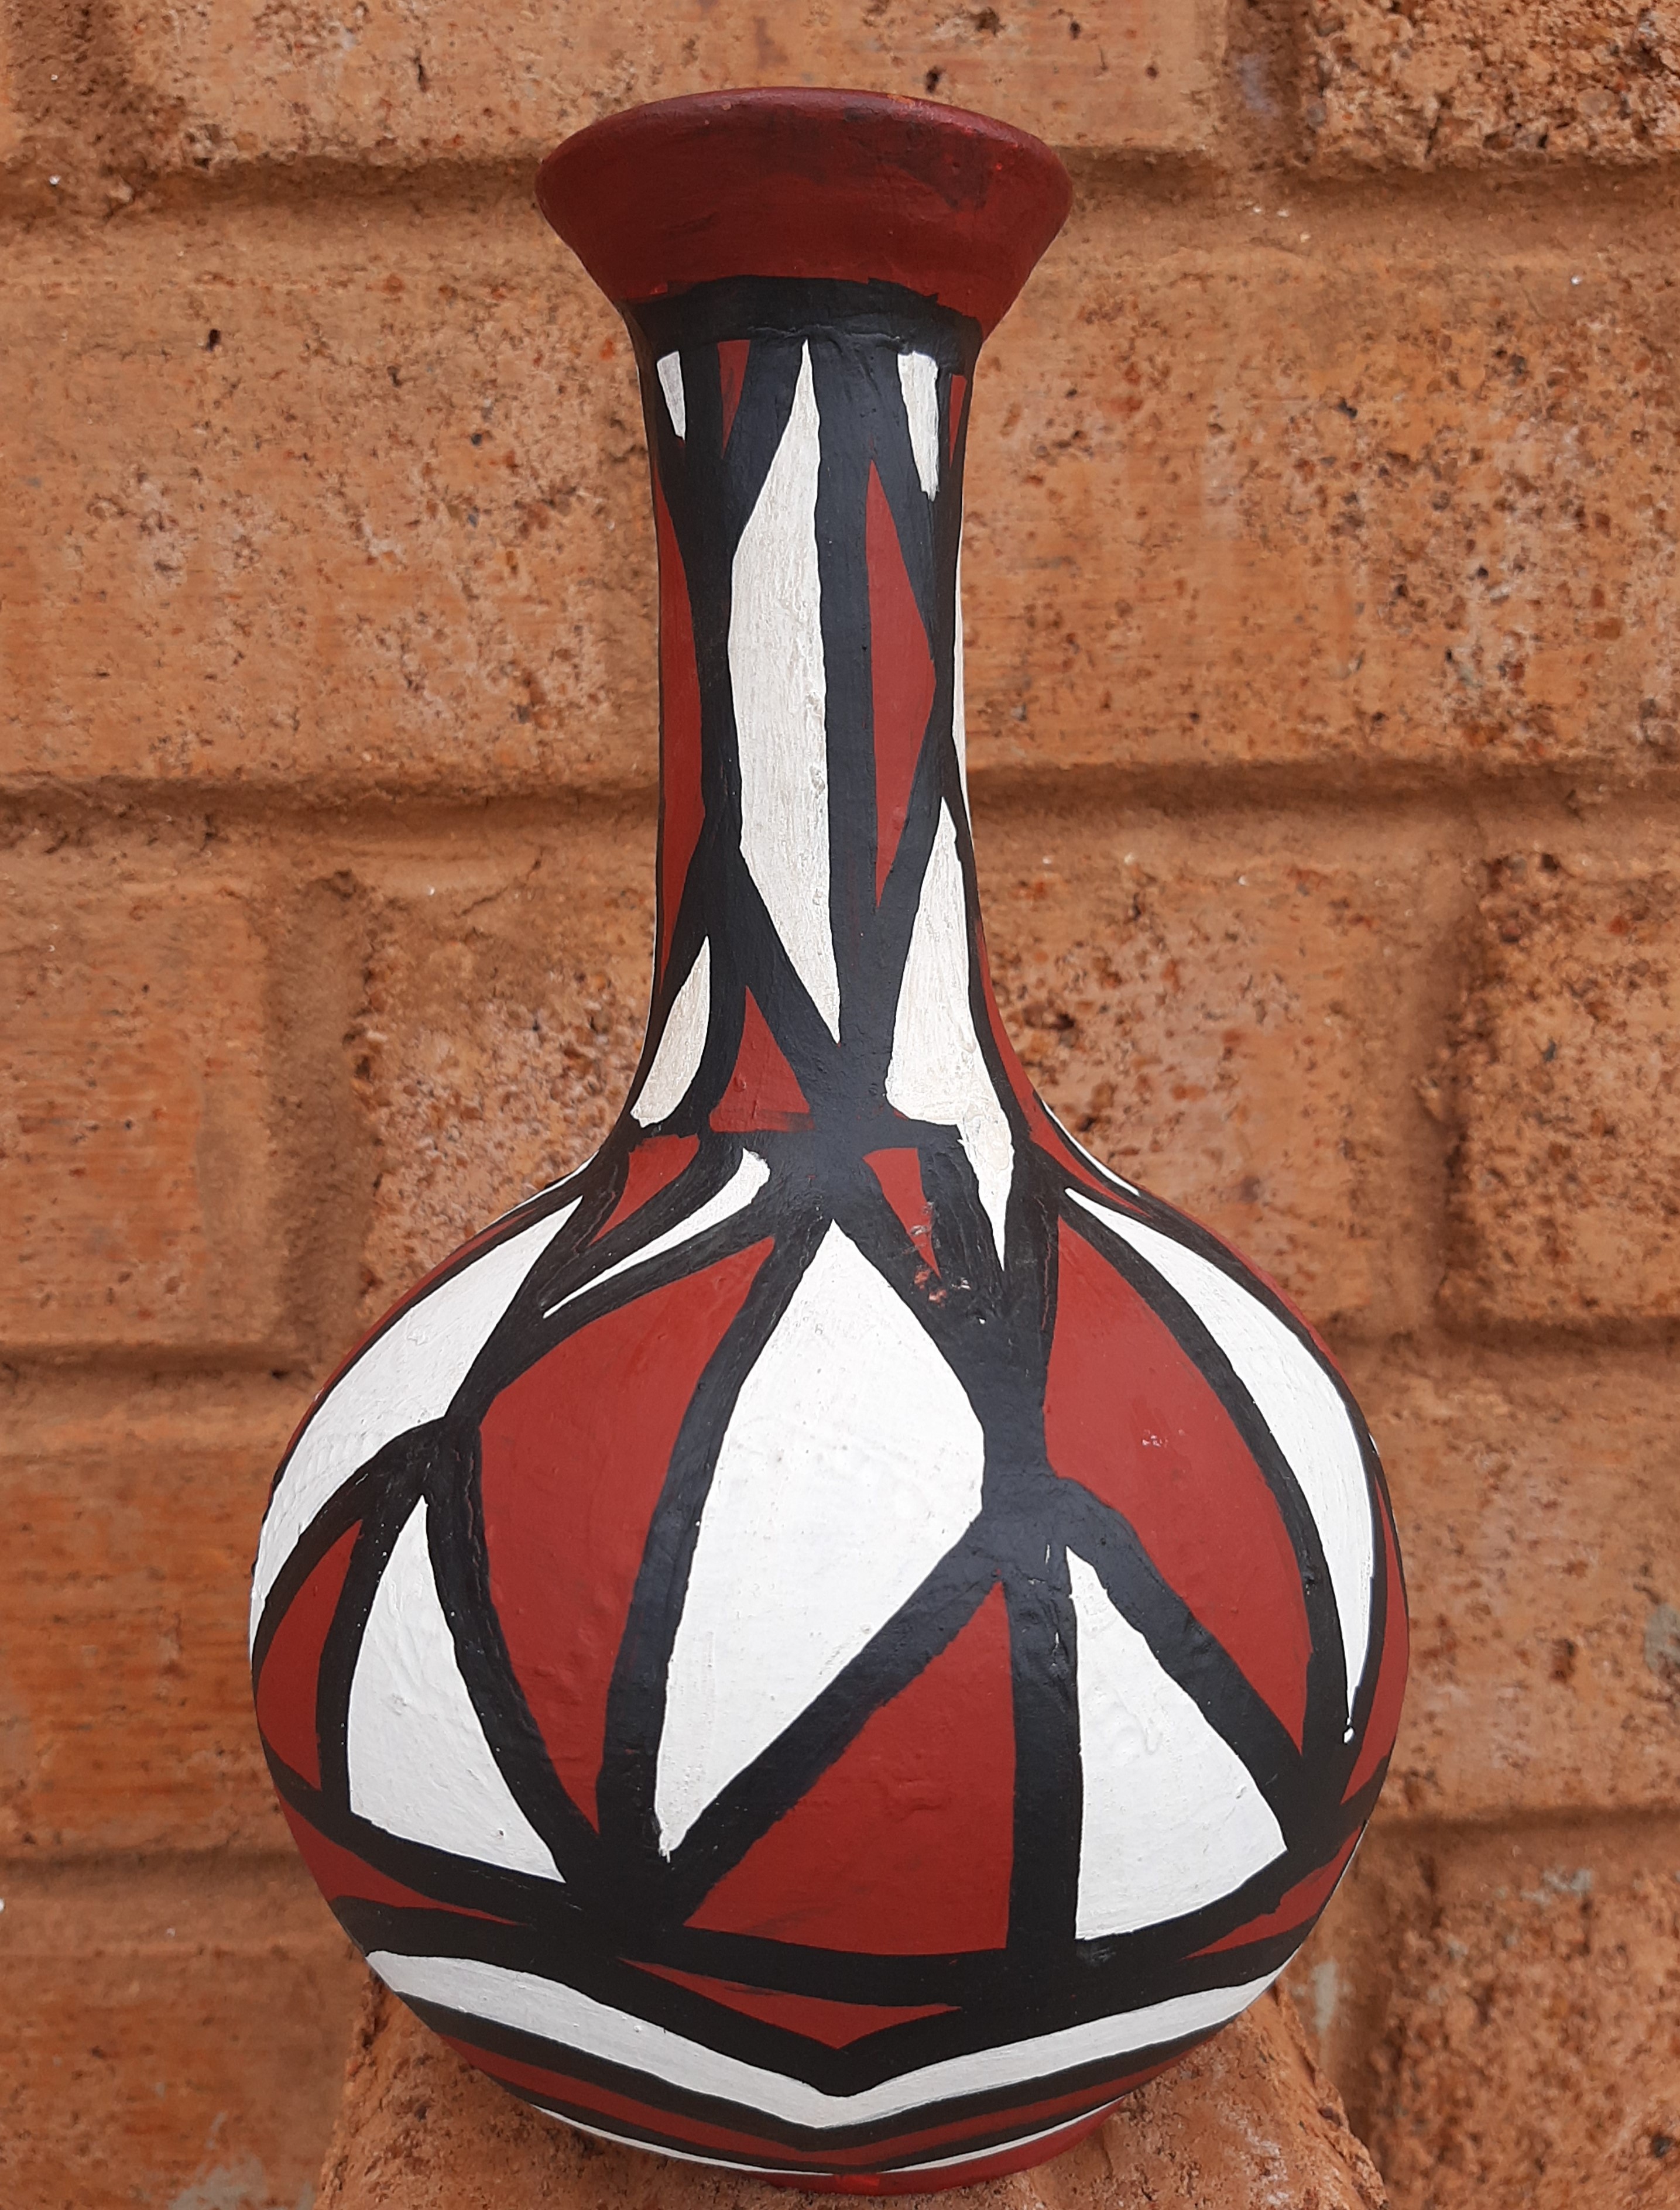 This beautifully made African pot is used as the image of the African Discourse Studies group on DiscourseNet to symbolise an African folktale of how knowledge spread through world for the advancement of humanity. 'Anansi and the pot of wisdom' is the title of the story, which is fondly told in West Africa. This group studies, collaborates and share insights of African discourses with the rest of the world for better relationships and support for one another.